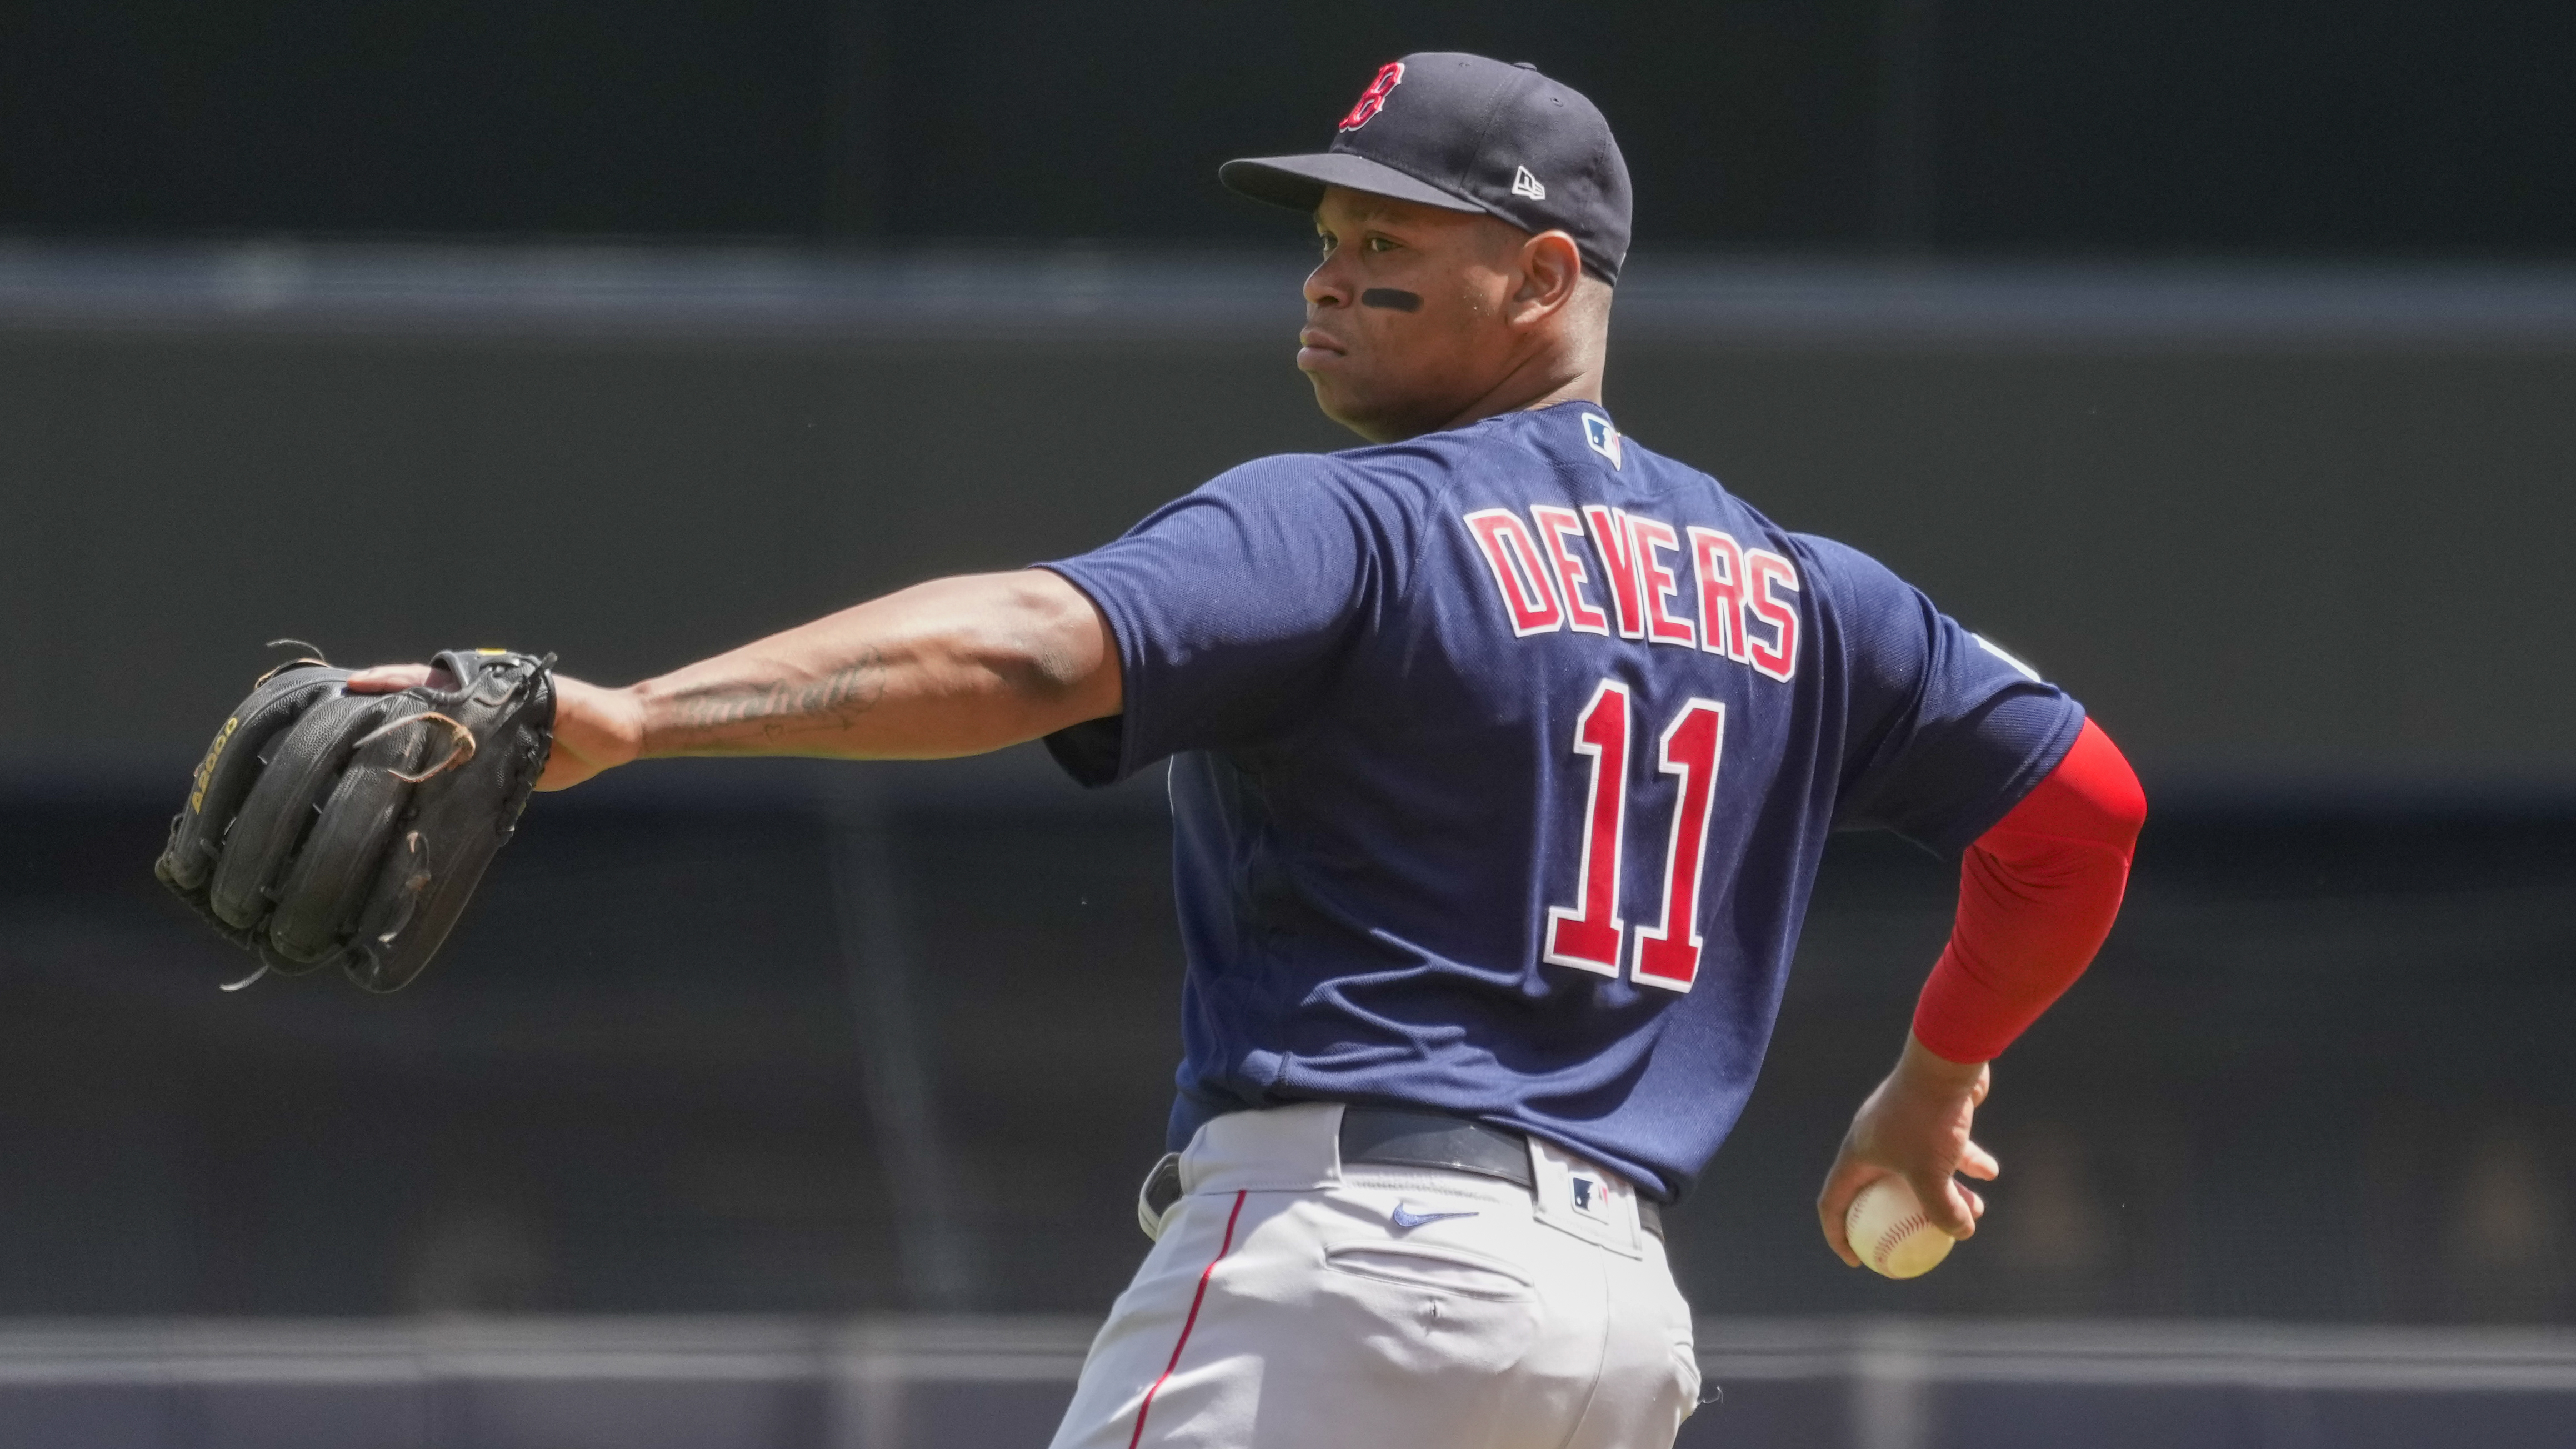 Is Rafael Devers' defense costing Red Sox games? (podcast